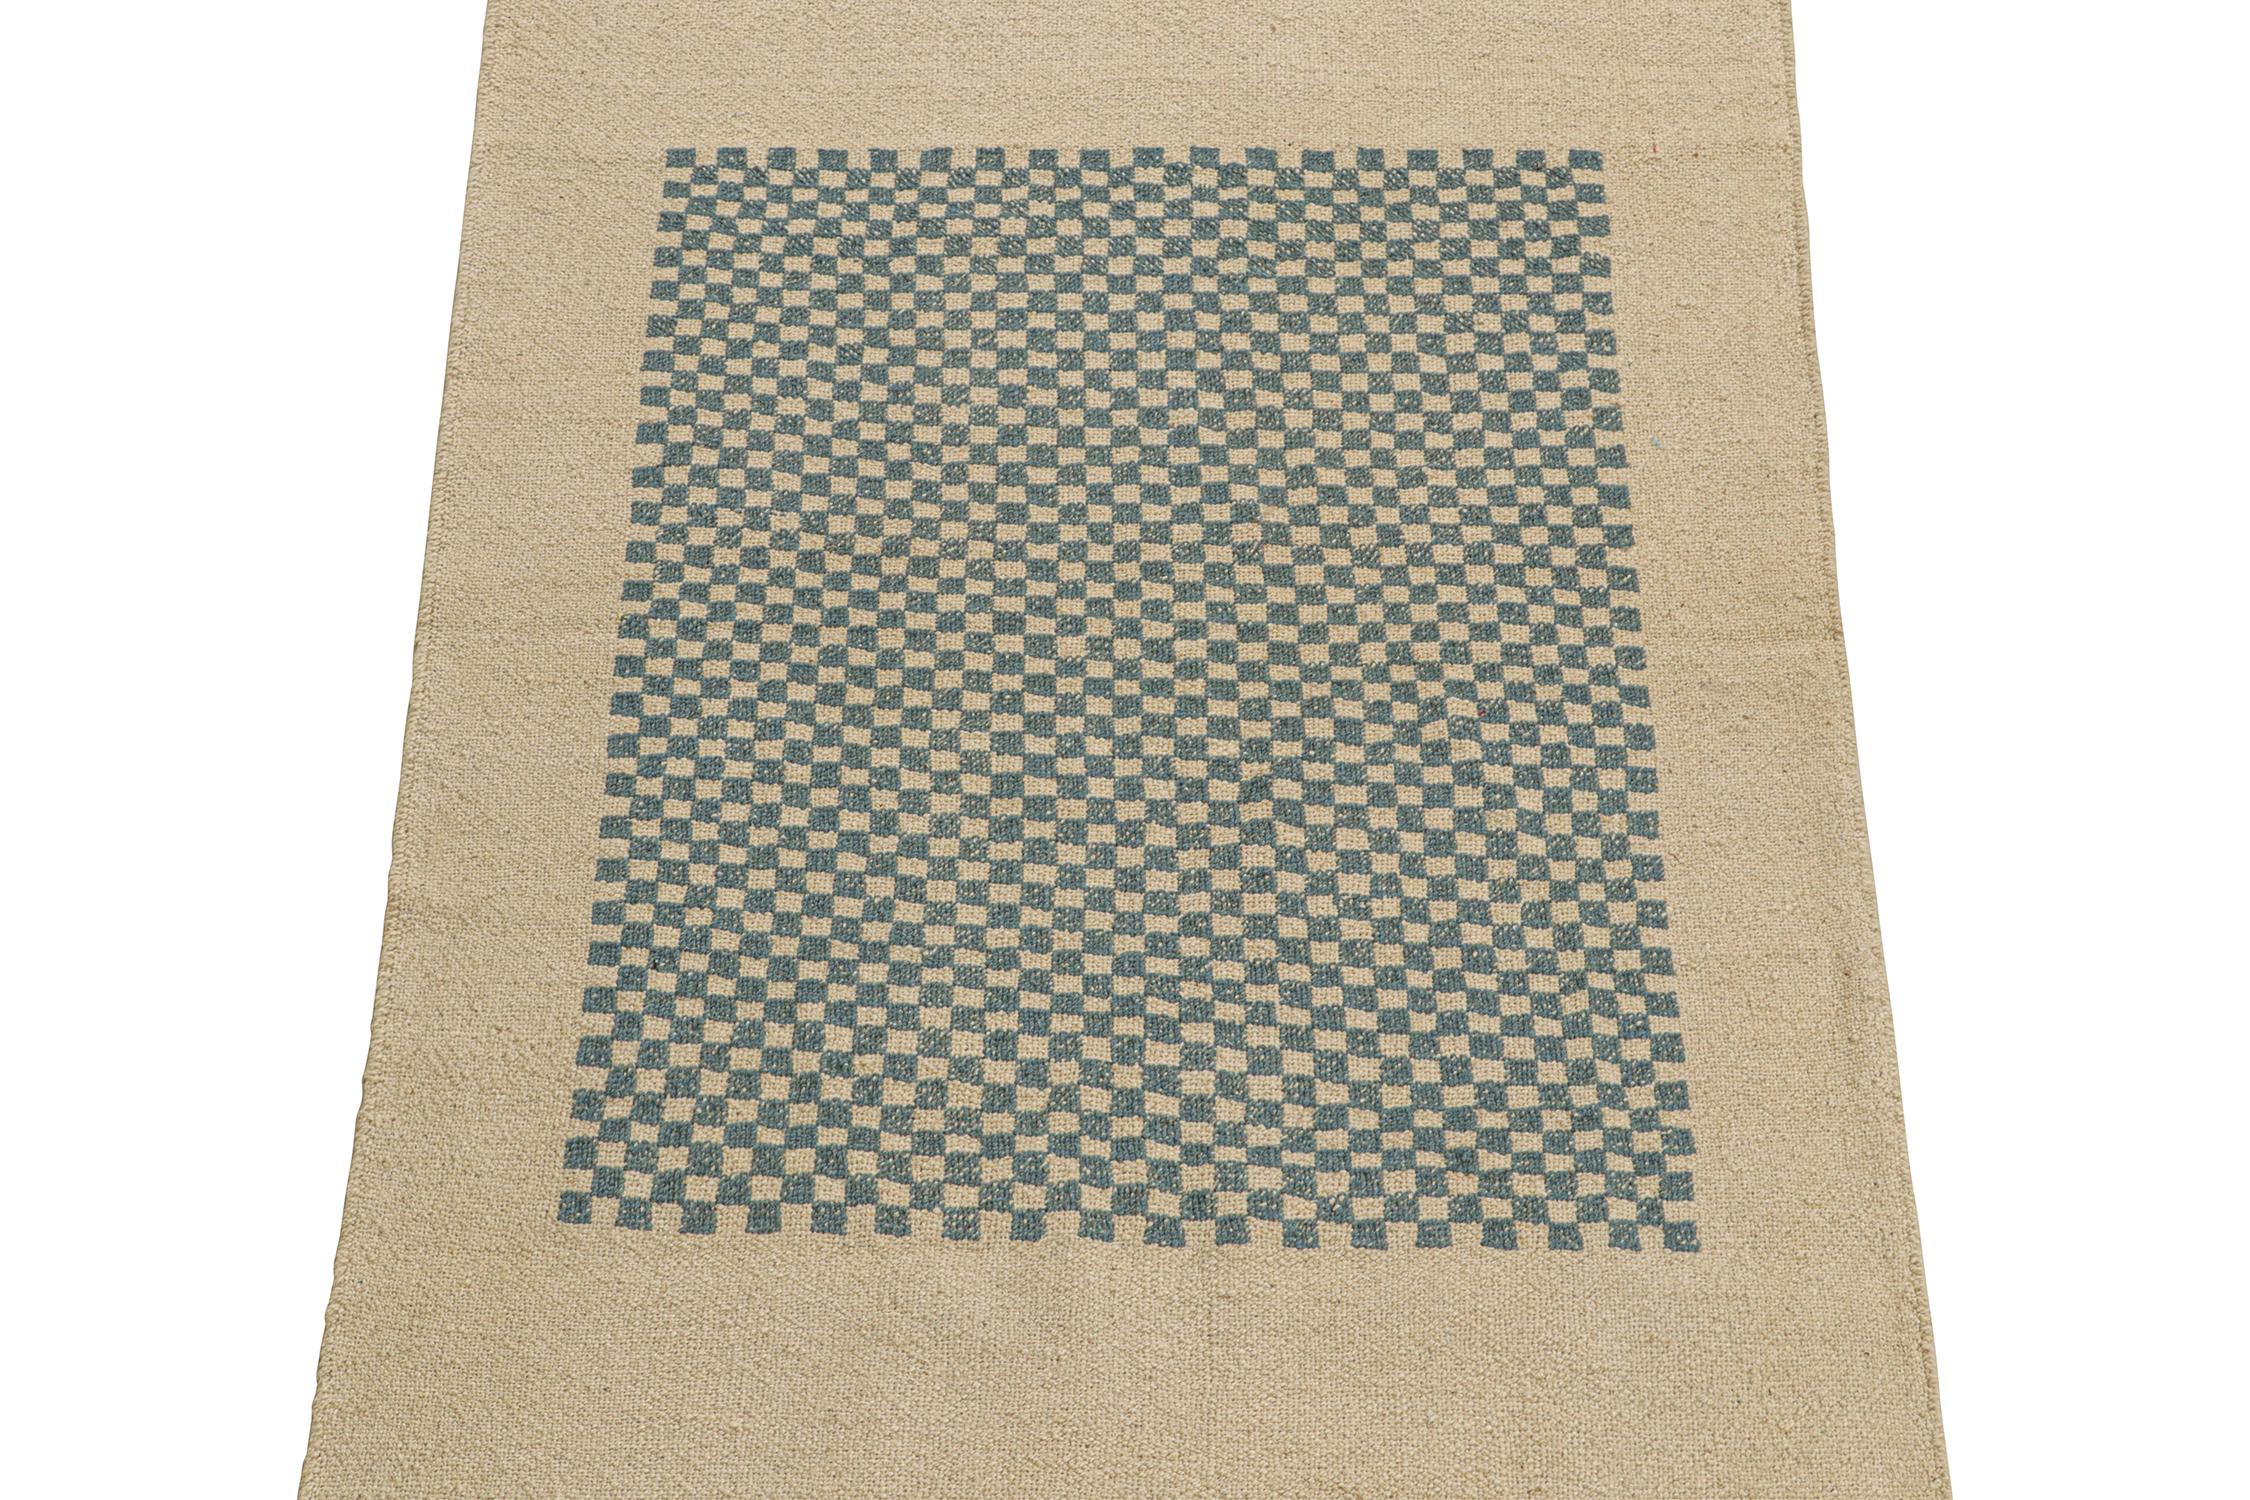 This contemporary 3x4 Persian kilim is an exciting new addition to Rug & Kilim’s flat weave designs. Handwoven in wool, its design is inspired by antique Persian Sofreh Kilims—a well-known tribal rug style with rich history. 

This particular rug